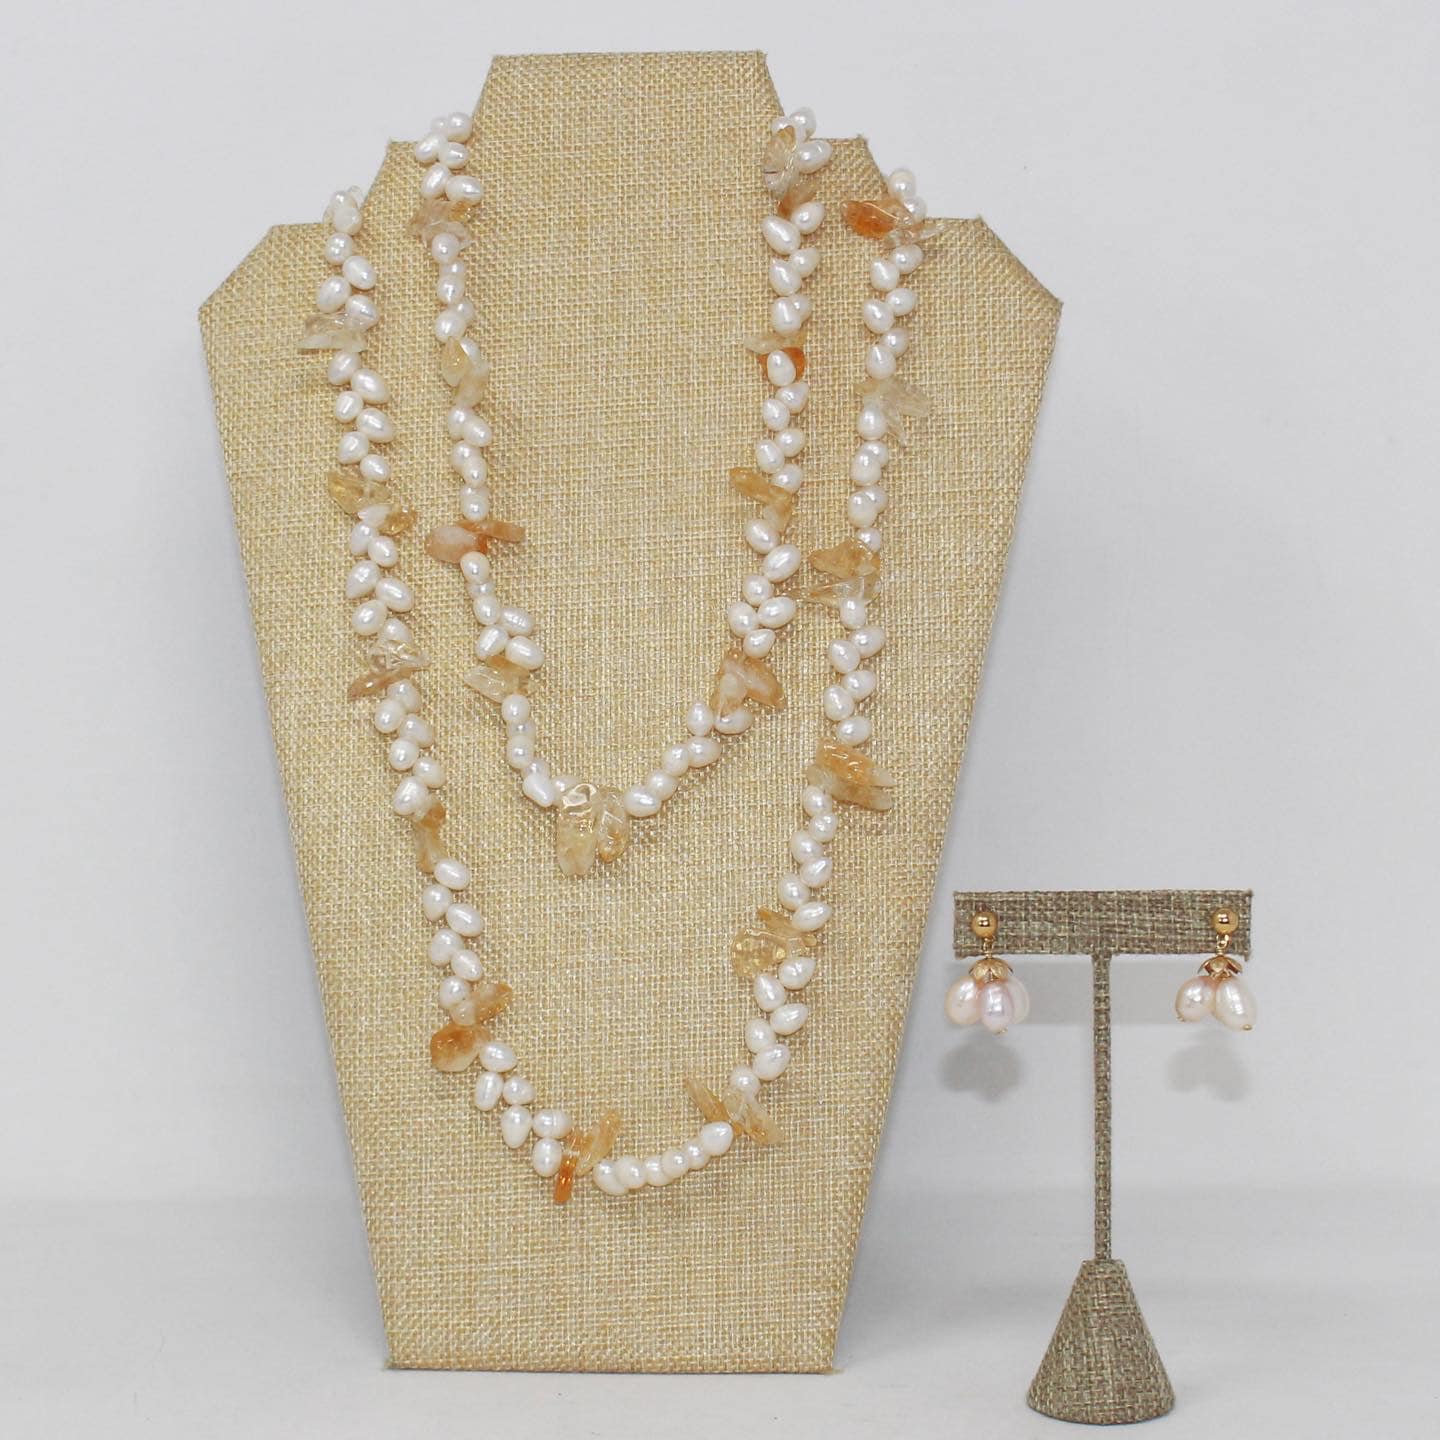 JEWELRY 39929 Pearl and Quartz Necklace Earrings Set a